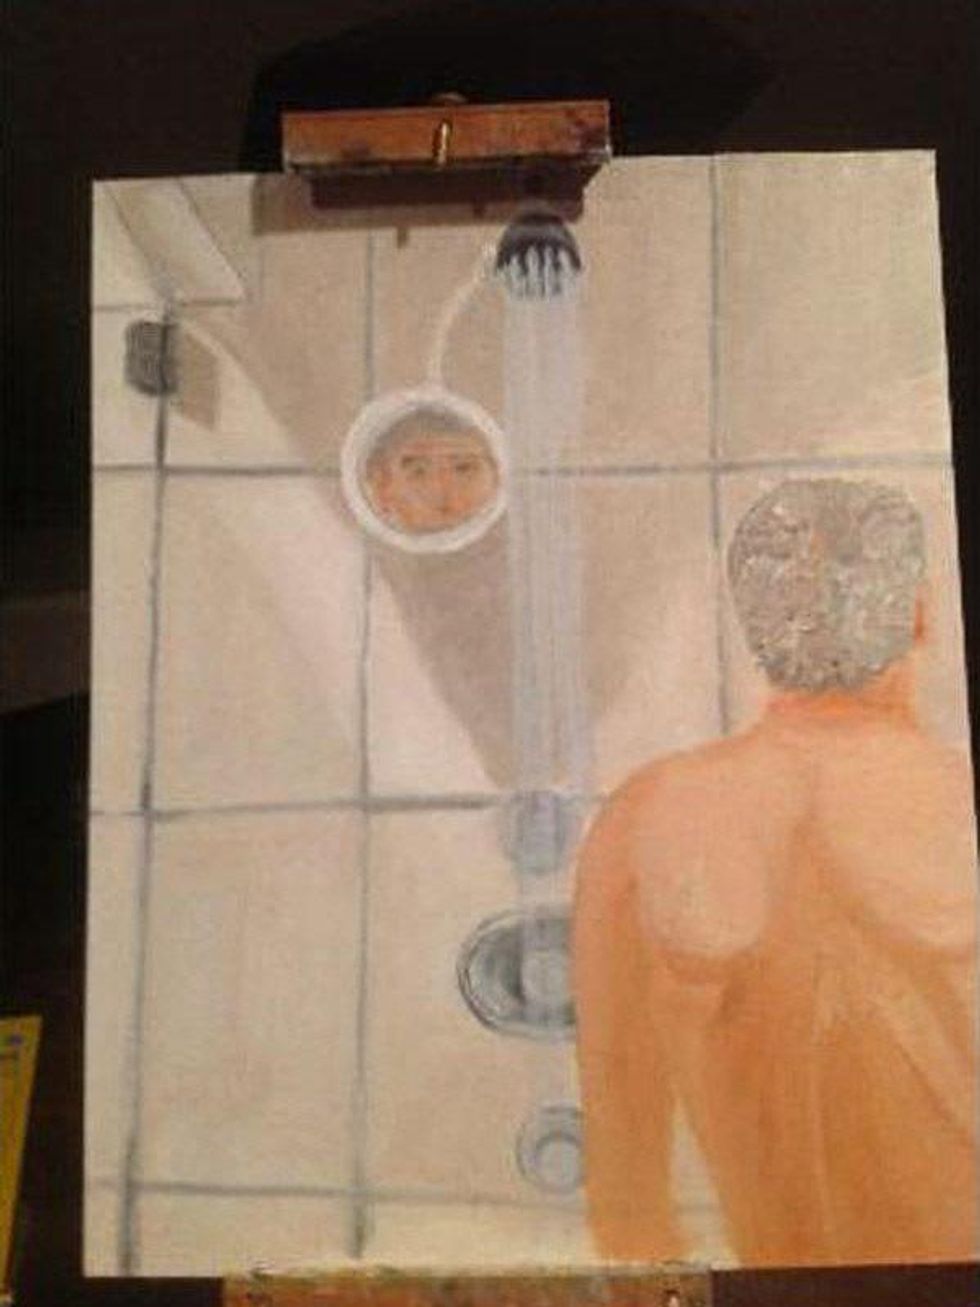 George H.W. Bush, email hacked, February 2013, shower painting